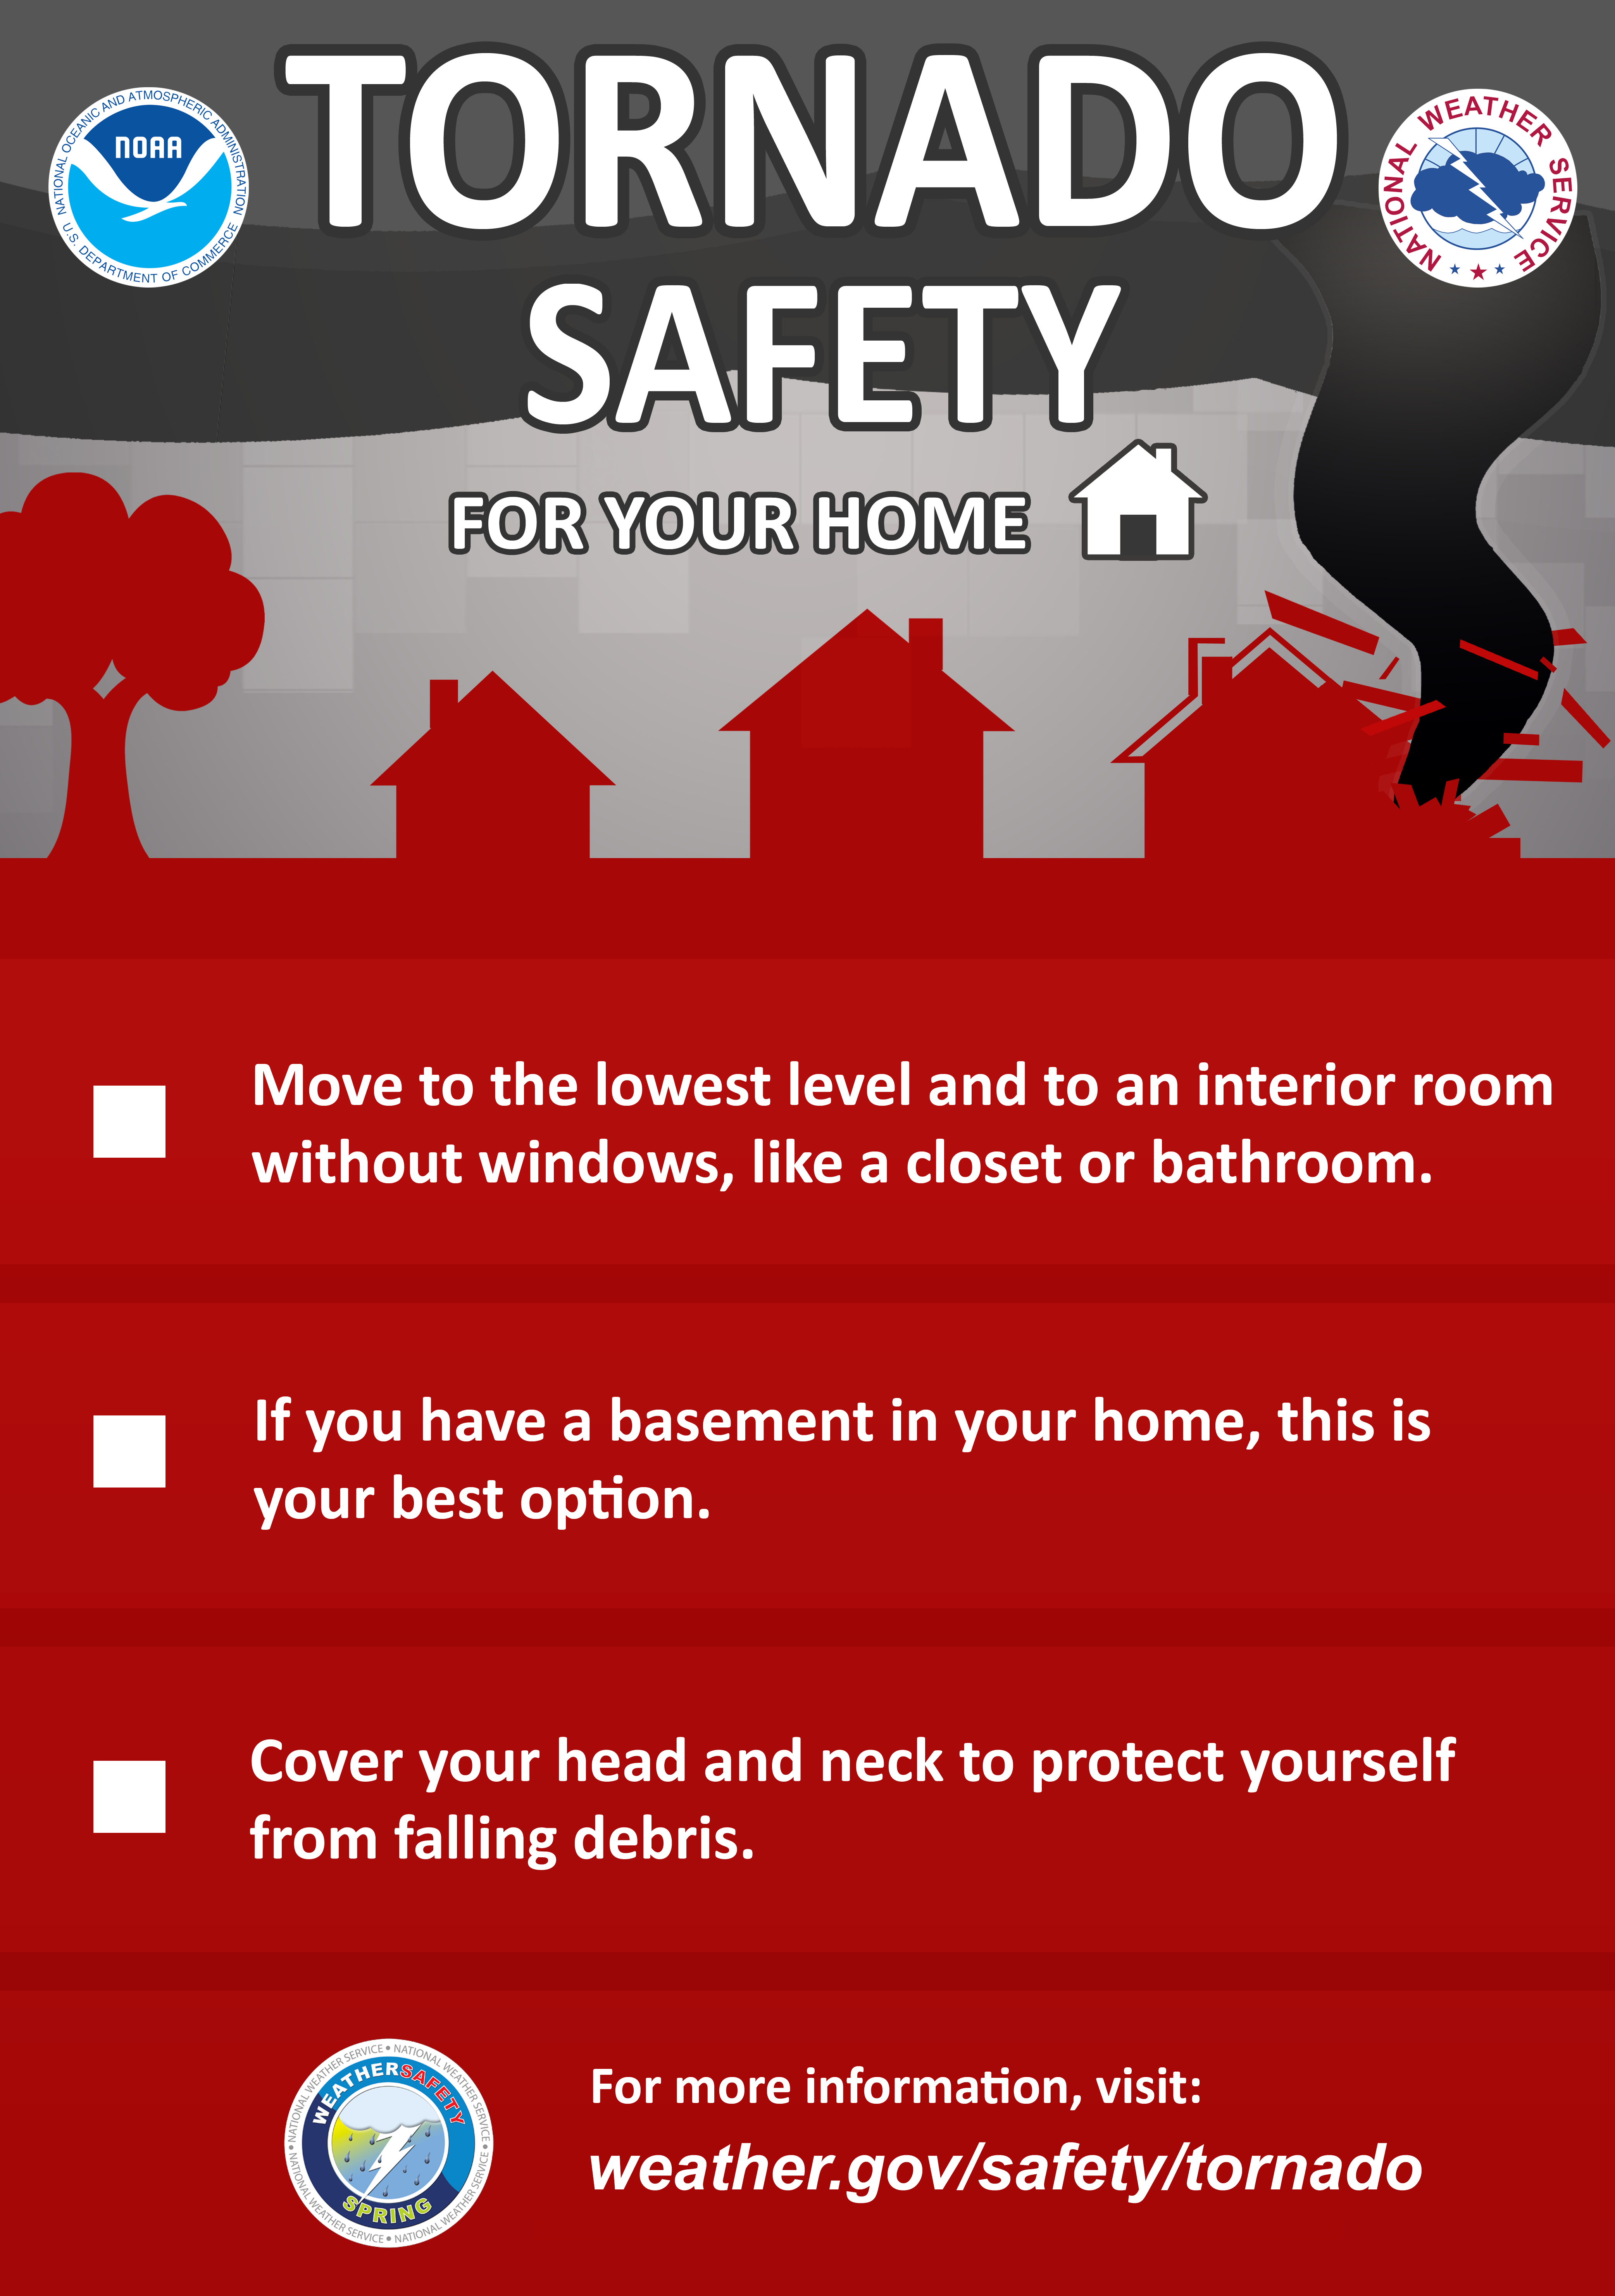 Tornado Safety for your home:Move to the lowest level and to an interior room without windows, like a closet or bathroom. If you have a basement in your home, this is your best option. Cover your head and neck to protect yourself from falling debris.